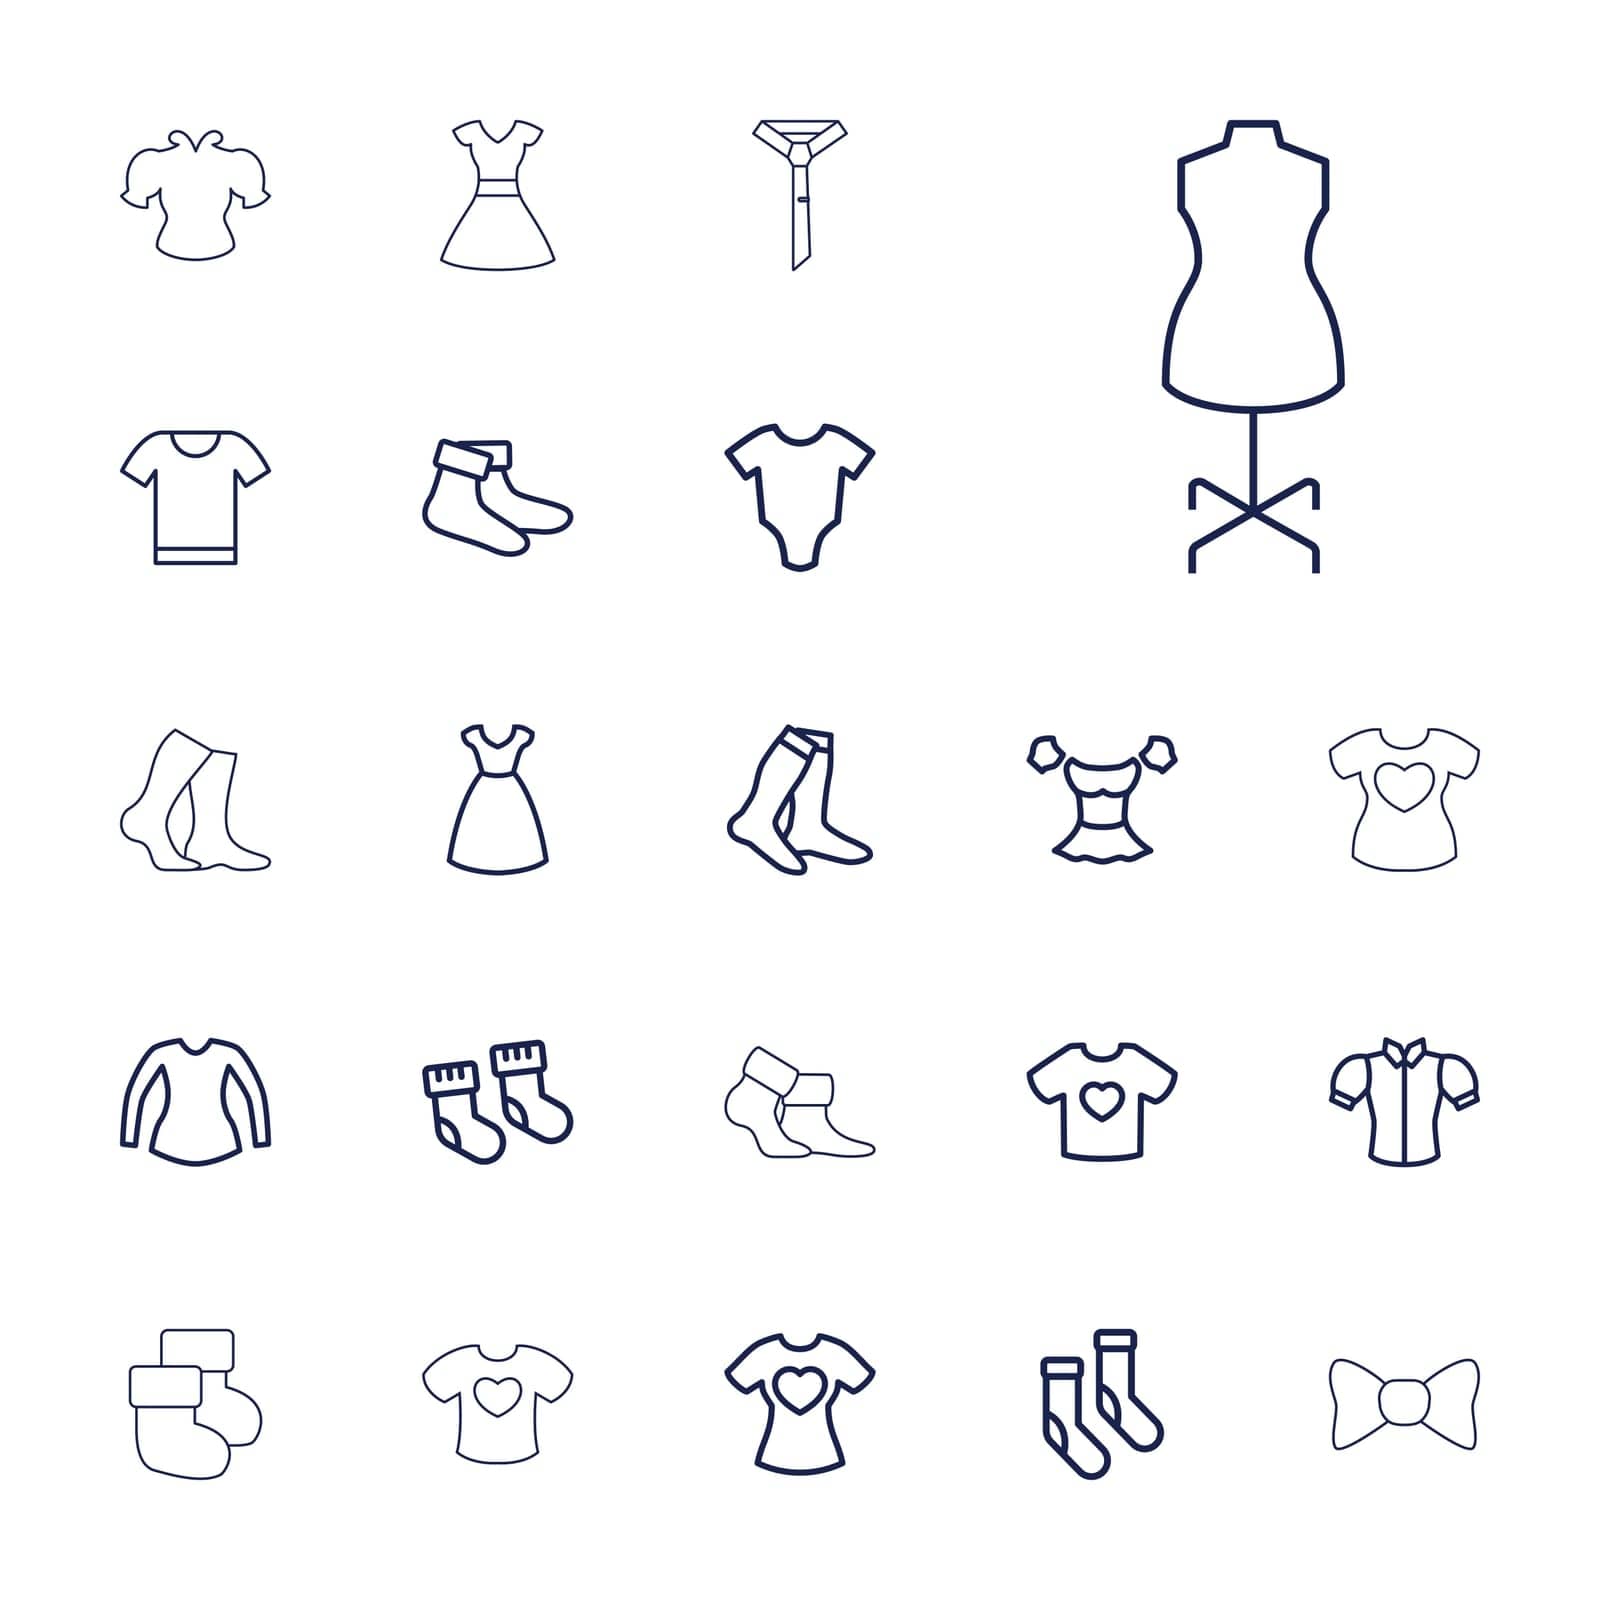 dress,symbol,mannequin,icon,isolated,wear,cotton,apparel,bow,cute,onesie,tie,white,design,garment,vector,female,graphic,foot,set,blouse,cartoon,socks,textile,heart,with,elegance,shirt,t,background,silhouette,baby,style,clothing,illustration,sketch,object,fashion